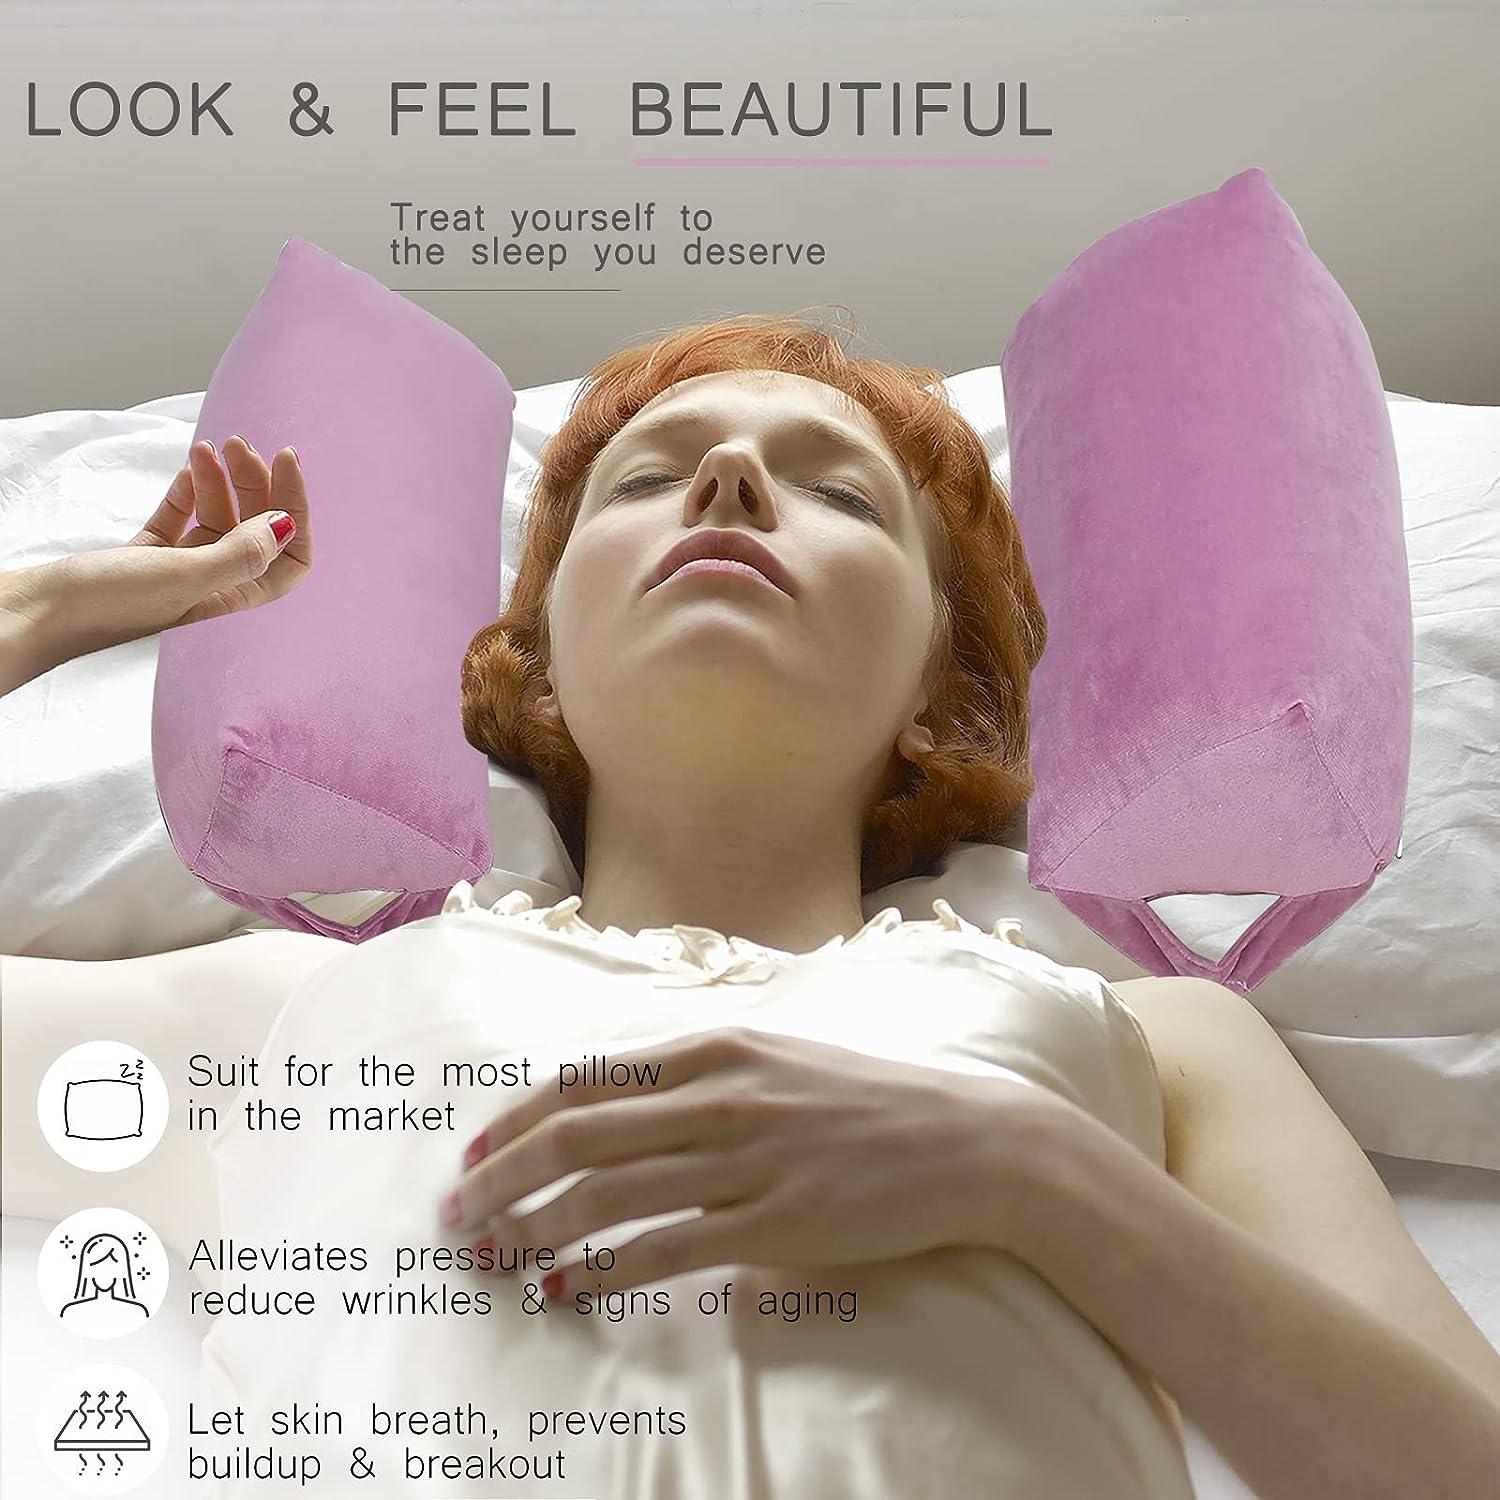 Beauty sleep? Plastic surgeon designs pillow to reduce signs of aging